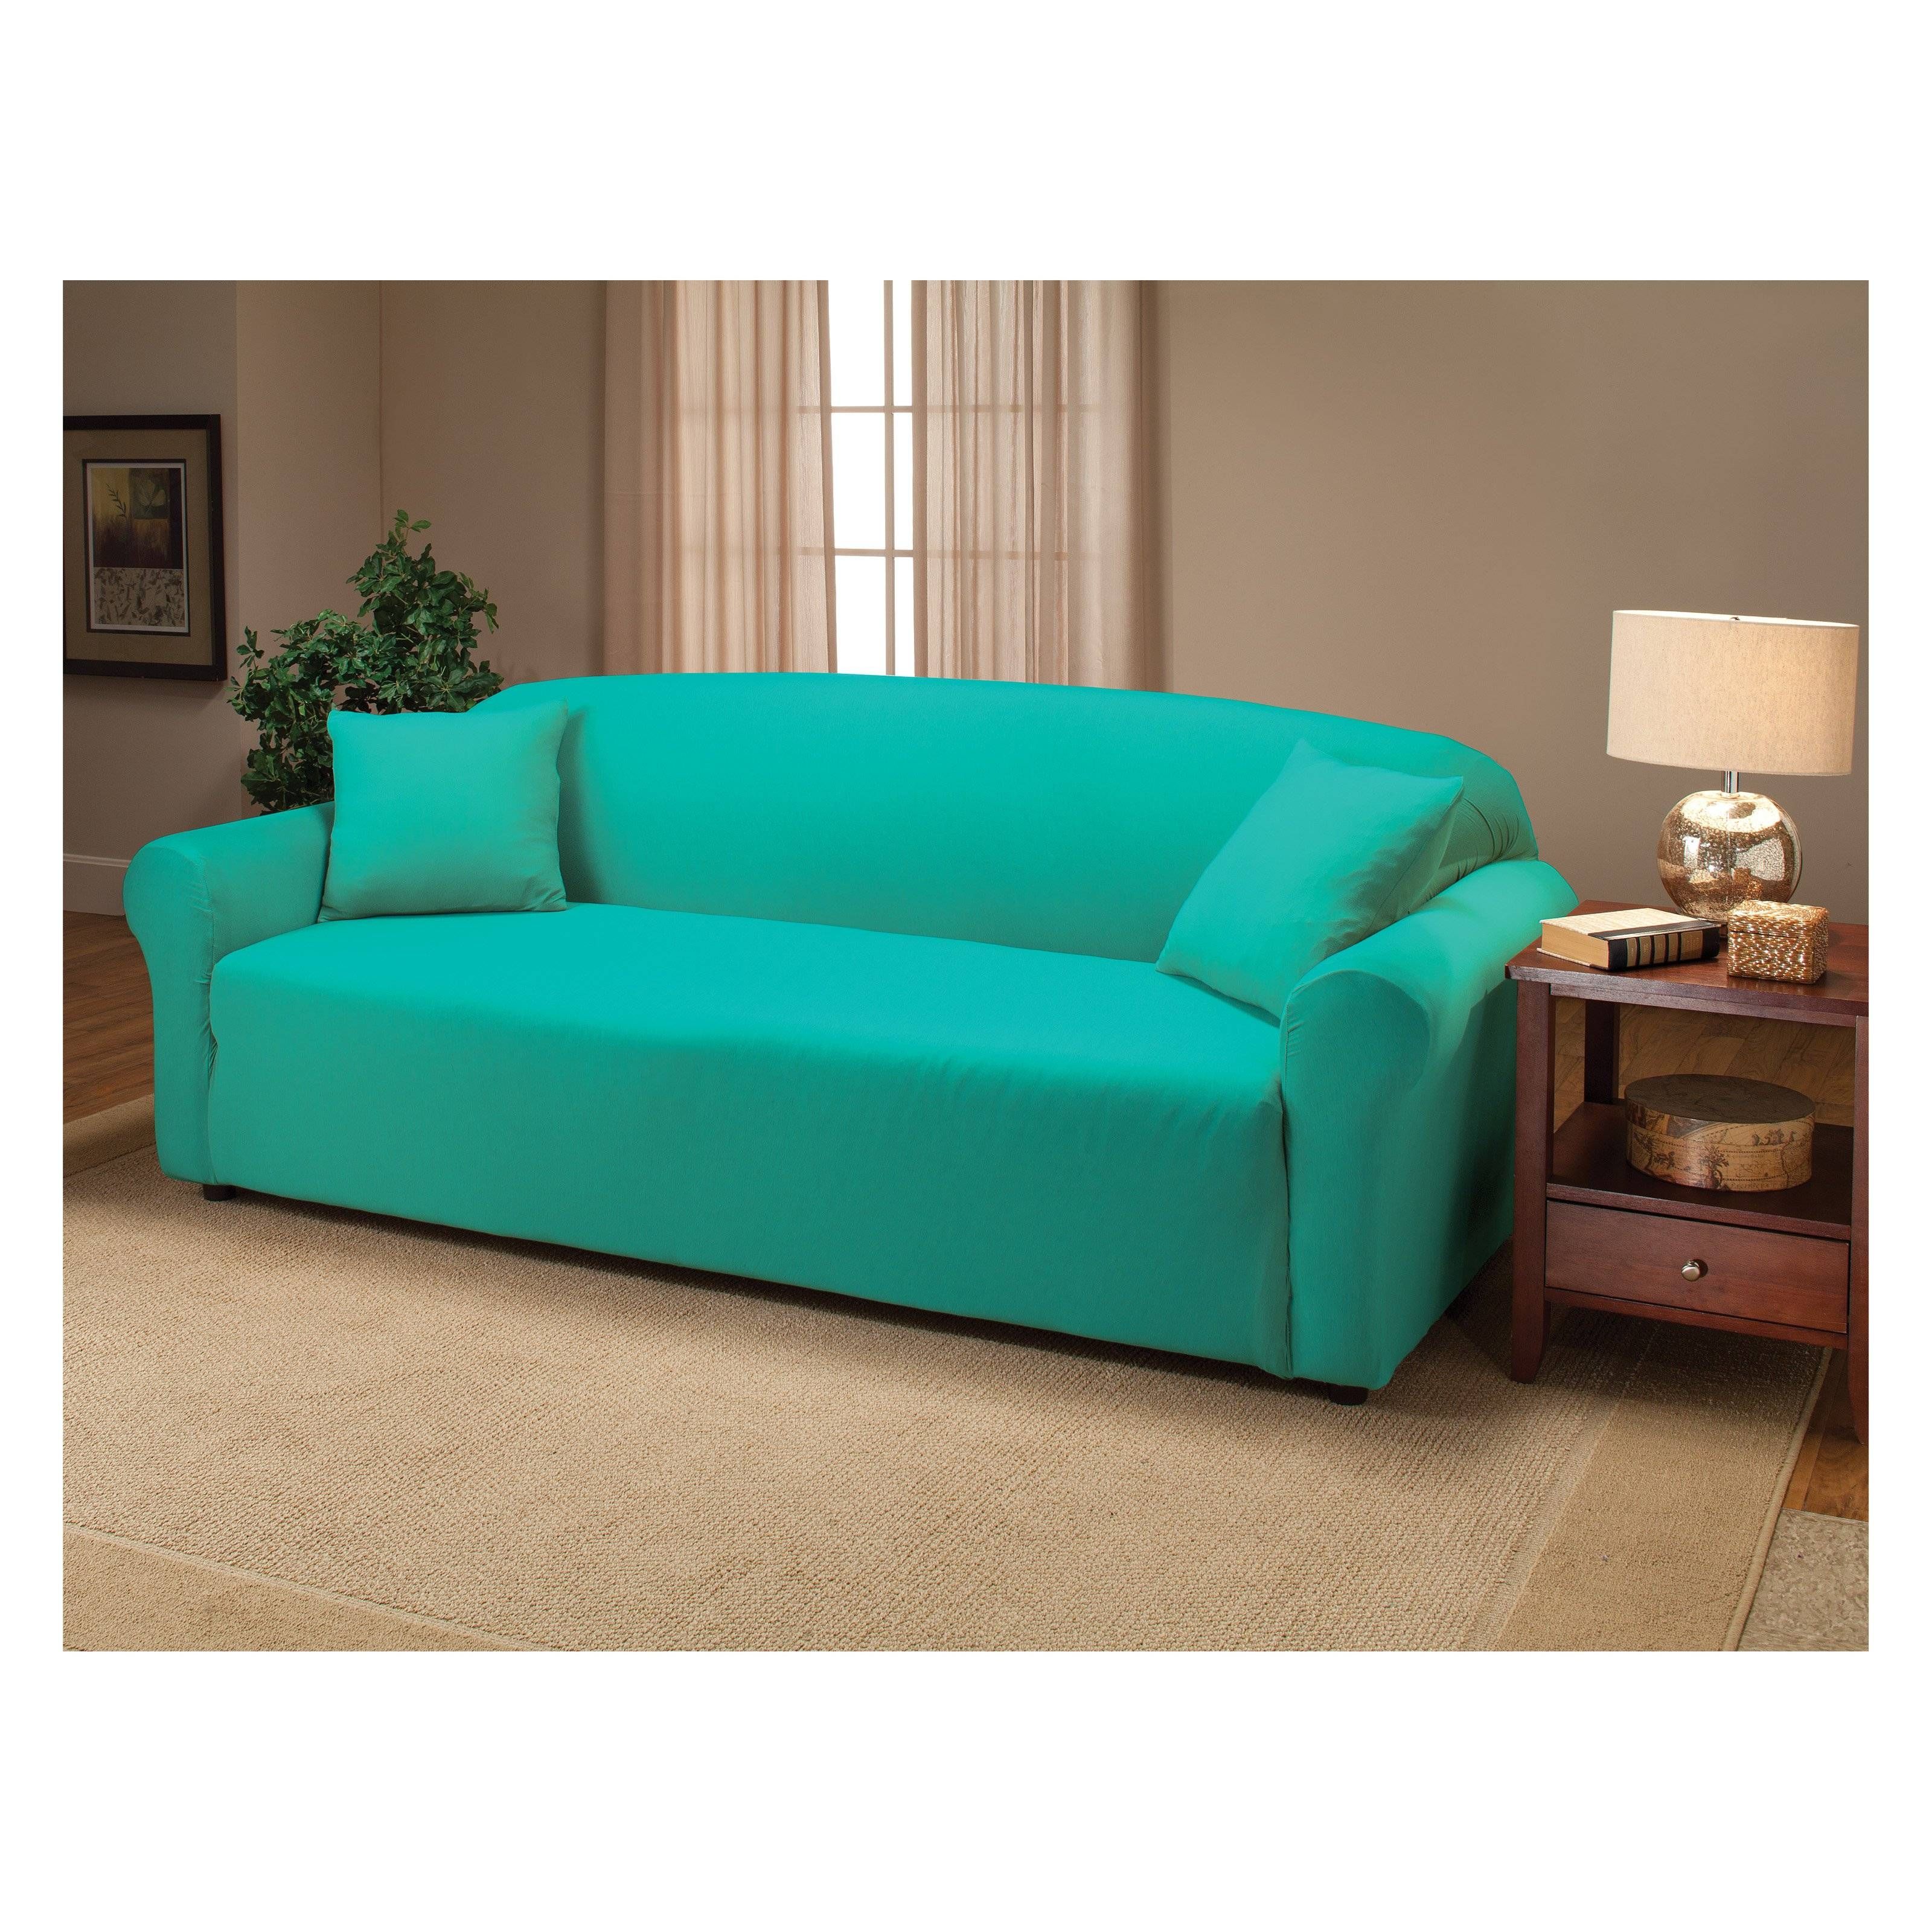 Maytex Stretch Pixel Two Piece Sofa Slipcover | Hayneedle Pertaining To Stretch Slipcovers For Sofas (View 11 of 15)